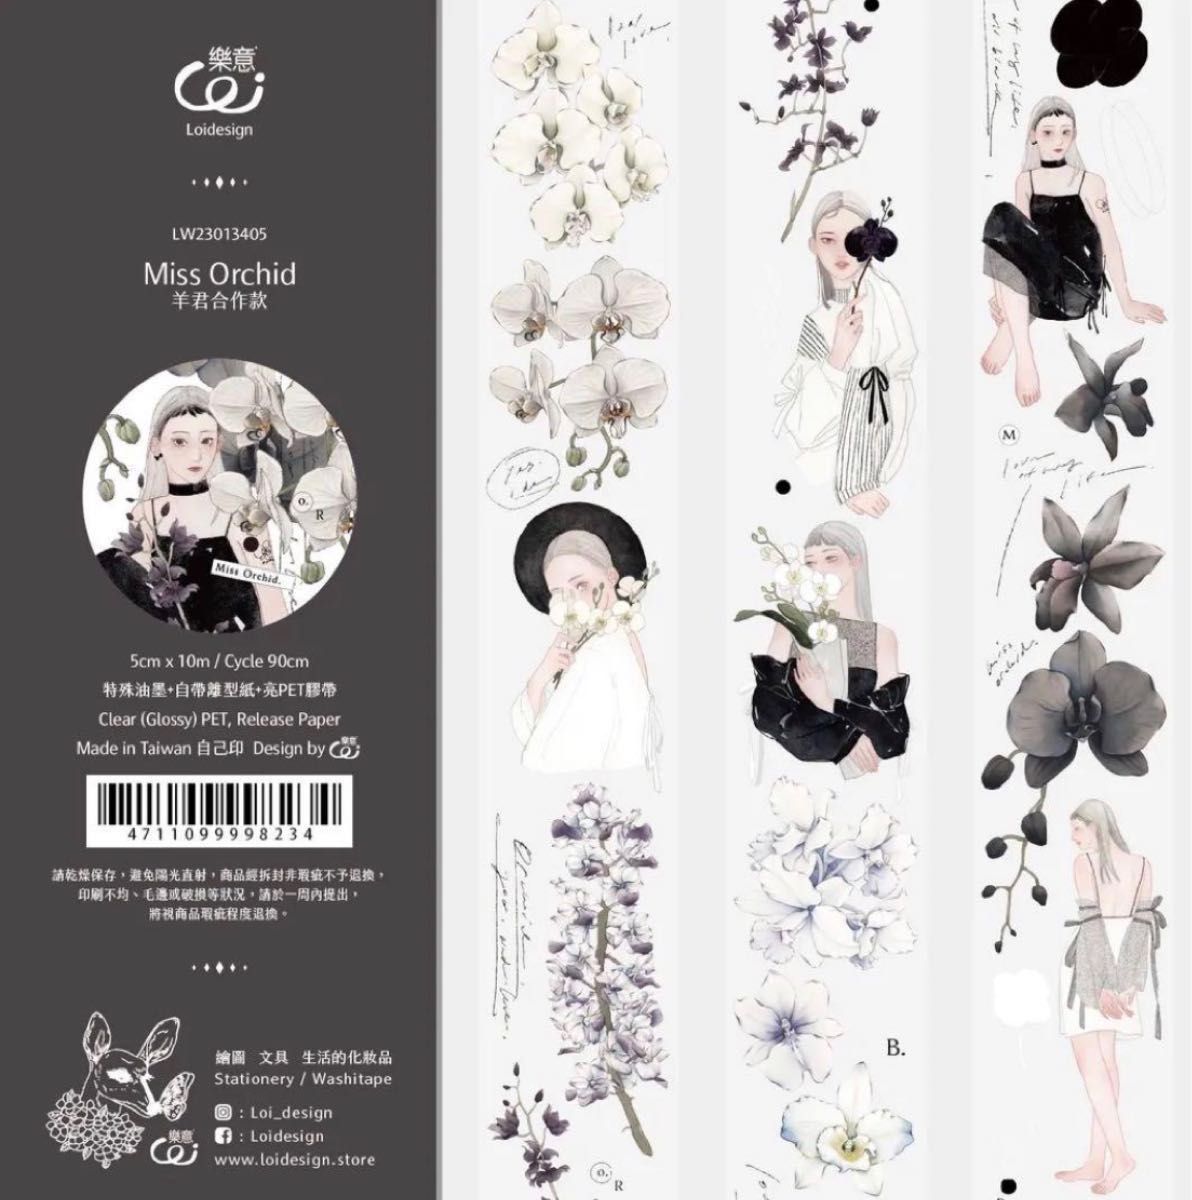 Loidesign×羊君 コラボマステ 「Colorful Orchid&Miss Orchid」各1ループセット★台湾マステ